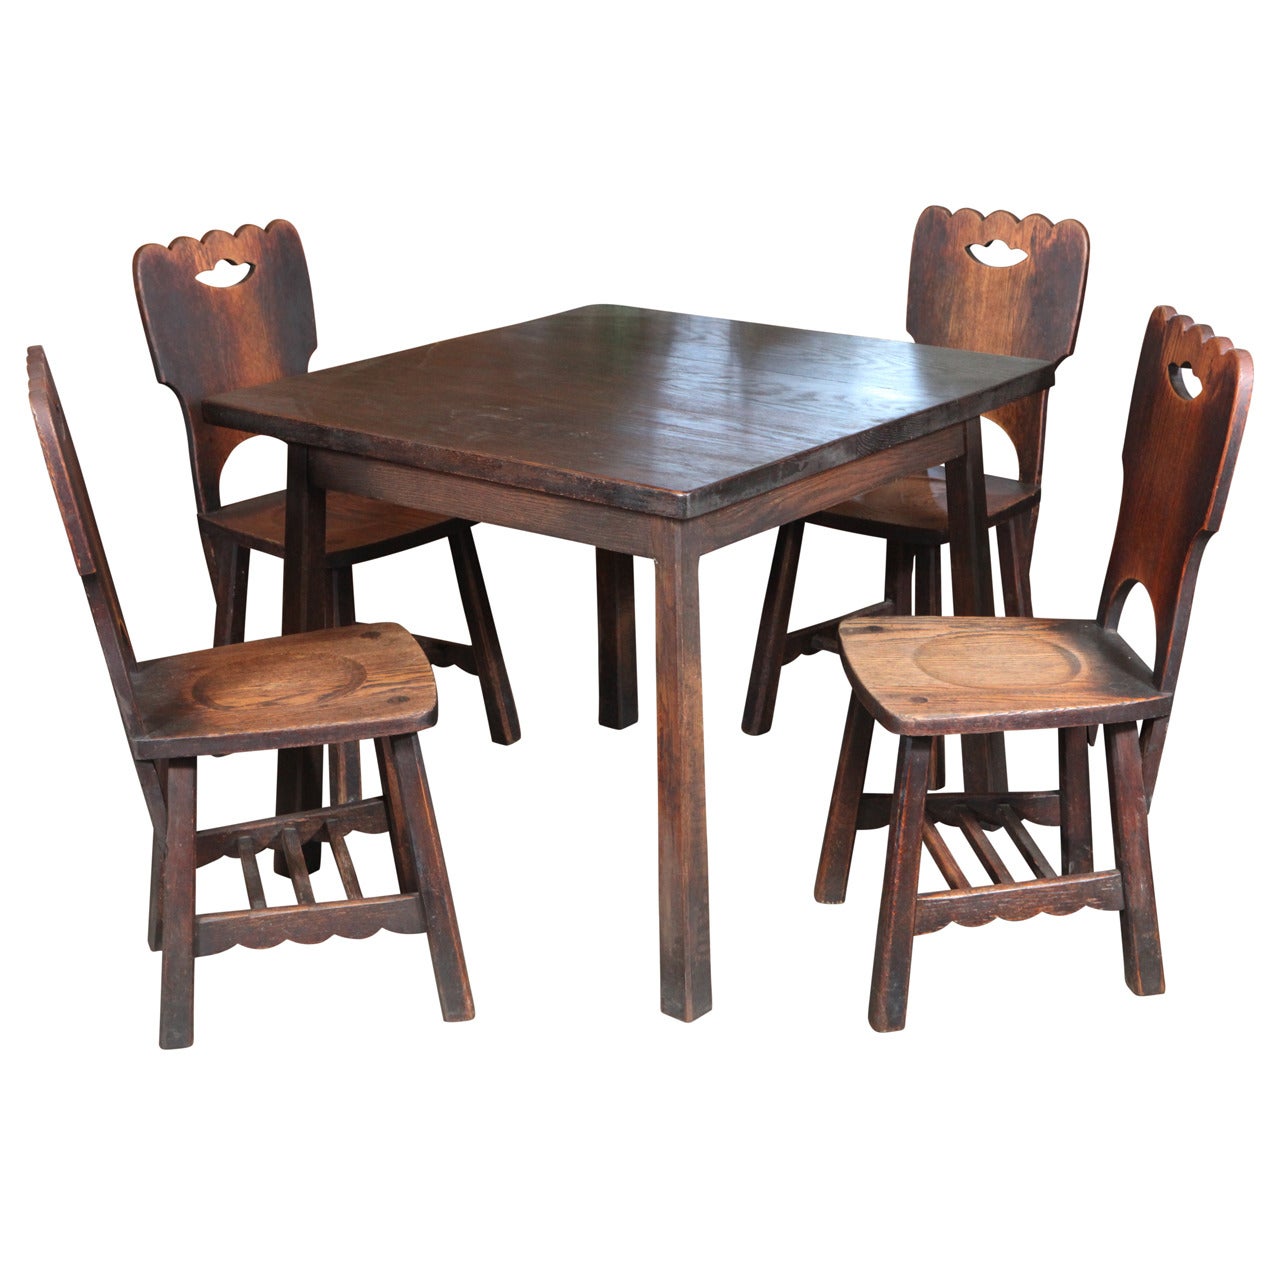 Arts and Crafts Table with Four Chairs